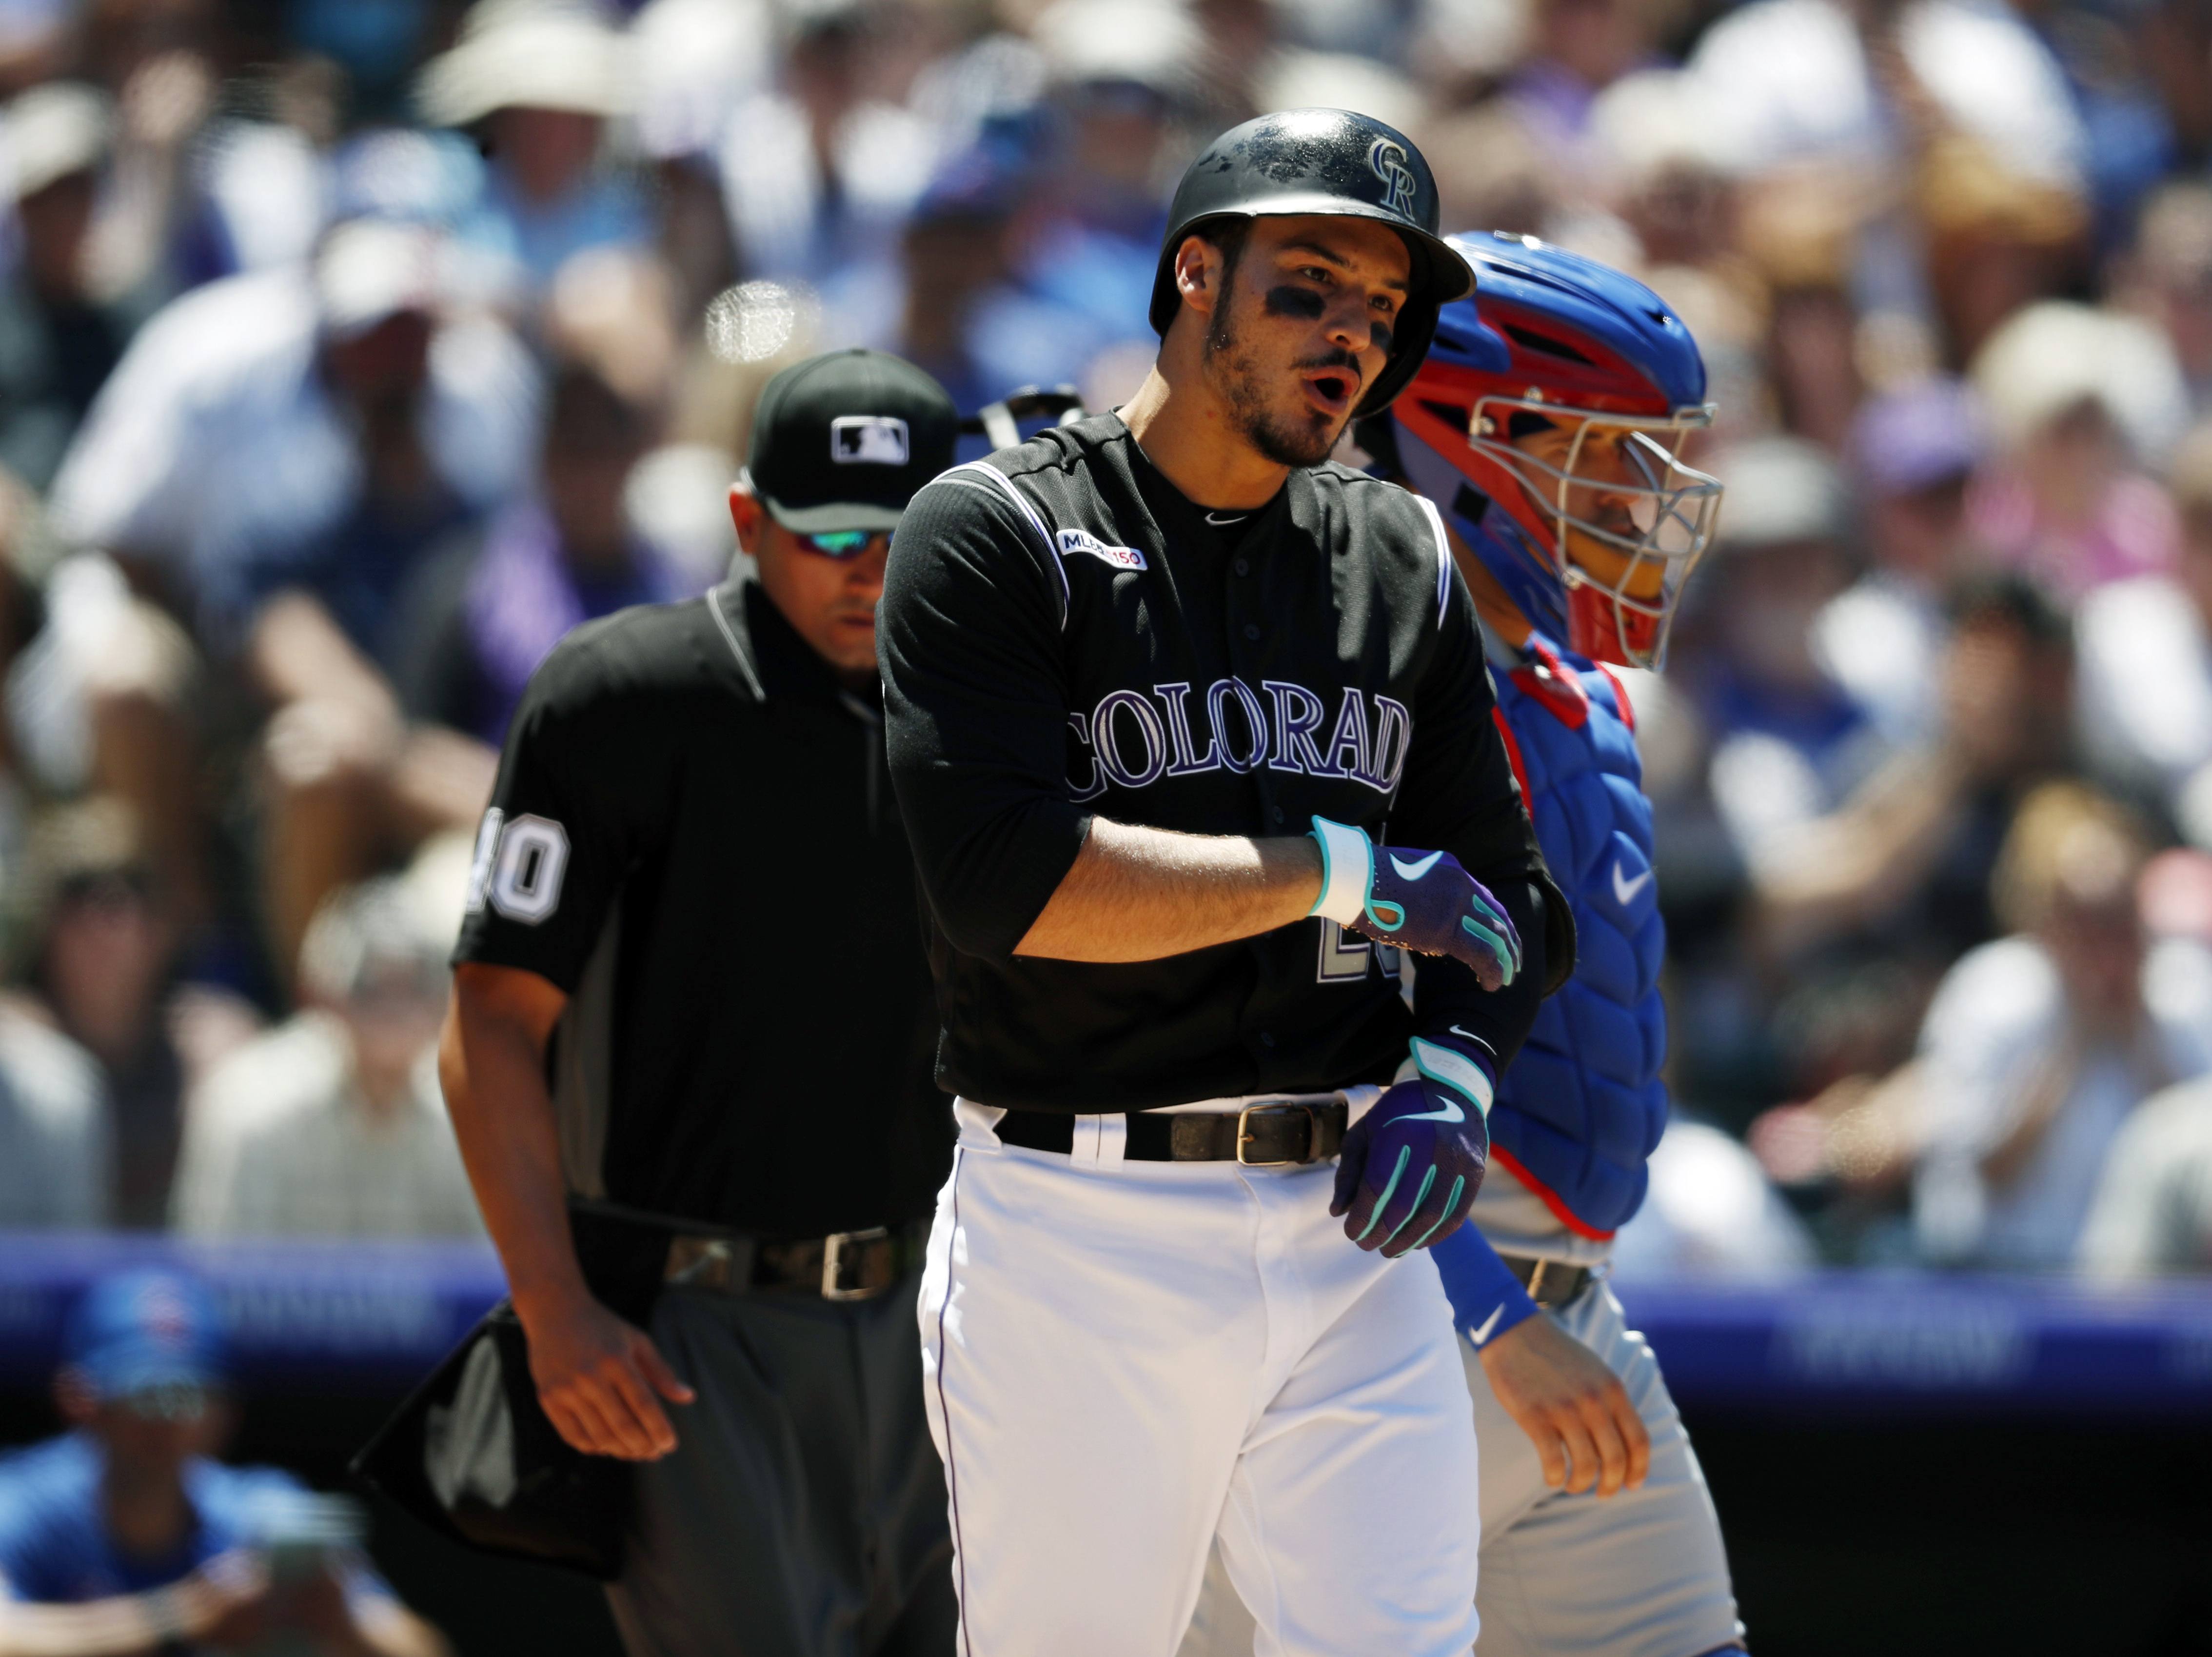 Rockies 3B Arenado hit by pitch on left forearm, leaves game